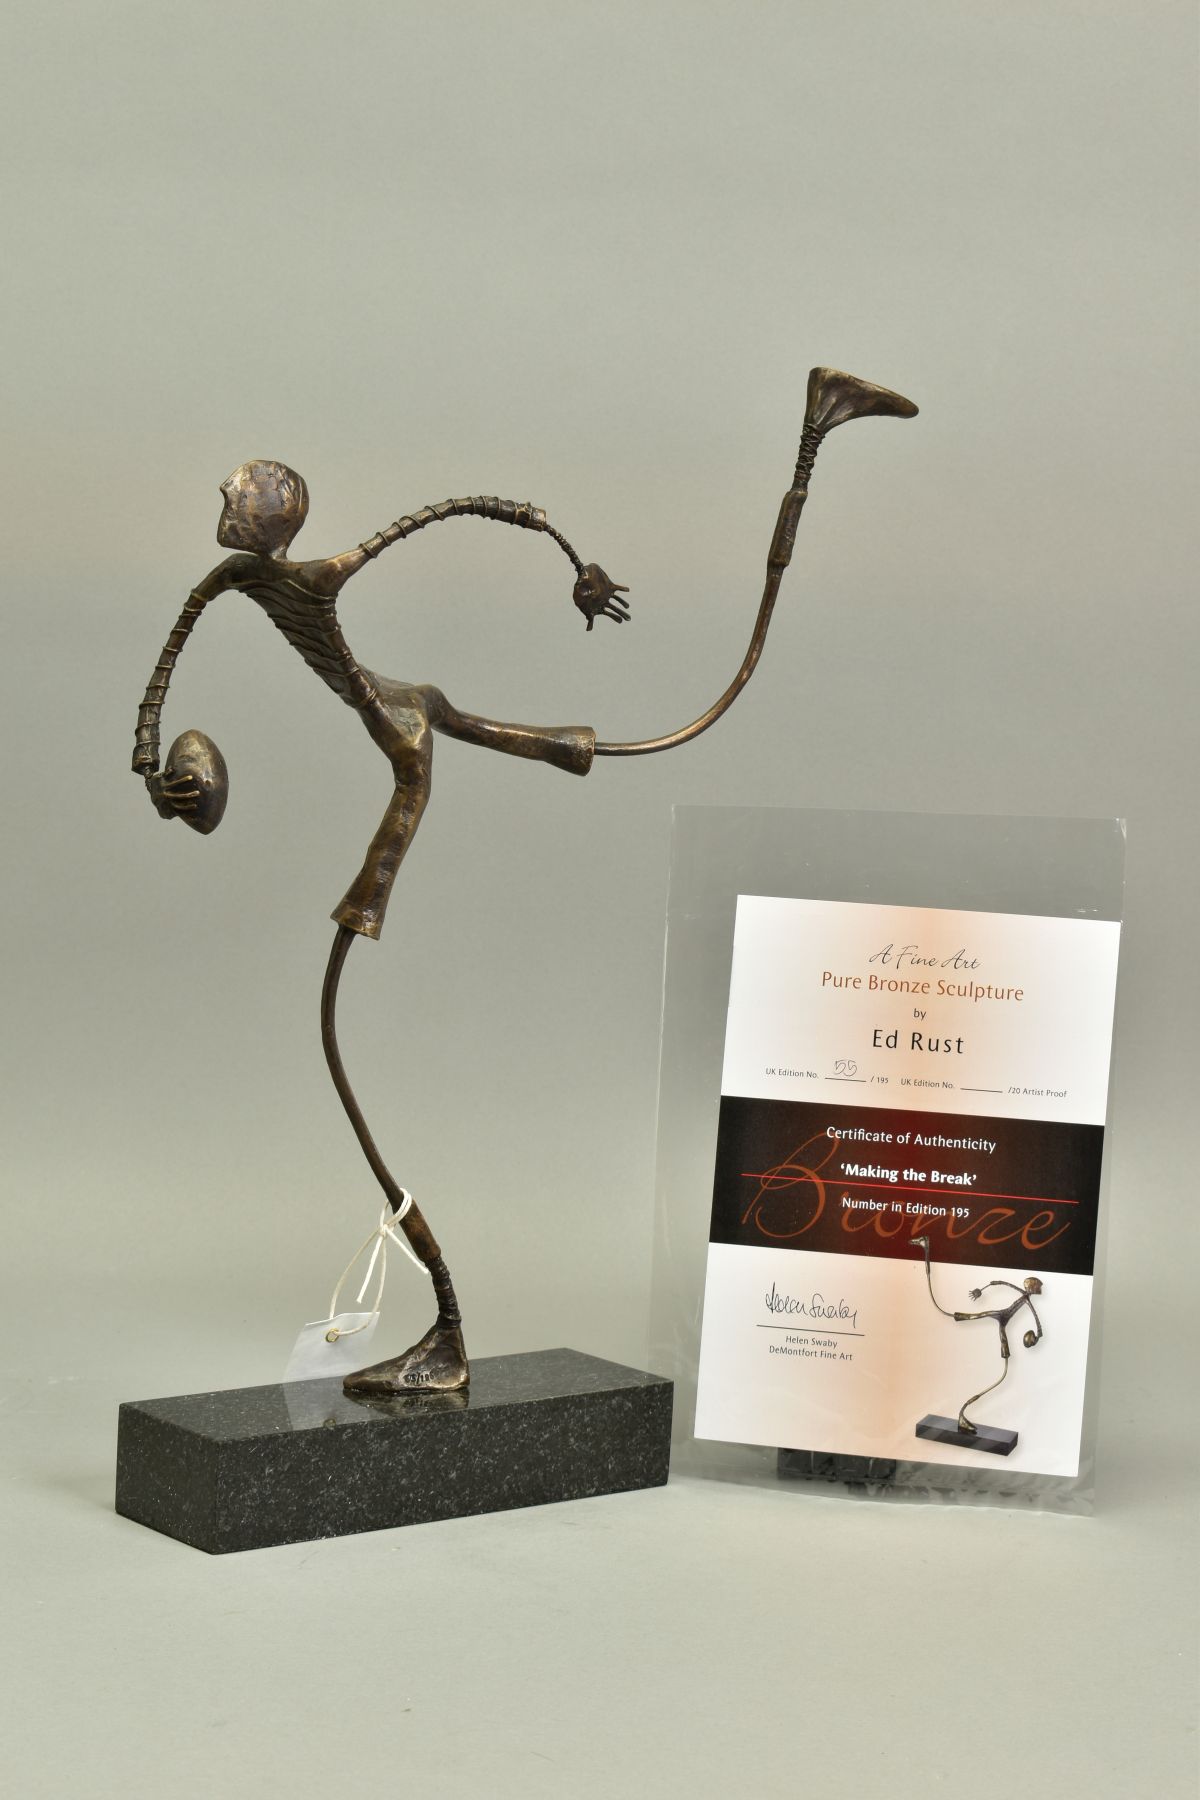 ED RUST (BRITISH CONTEMPORARY), 'Making The Break', a Limited Edition bronze sculpture of a figure